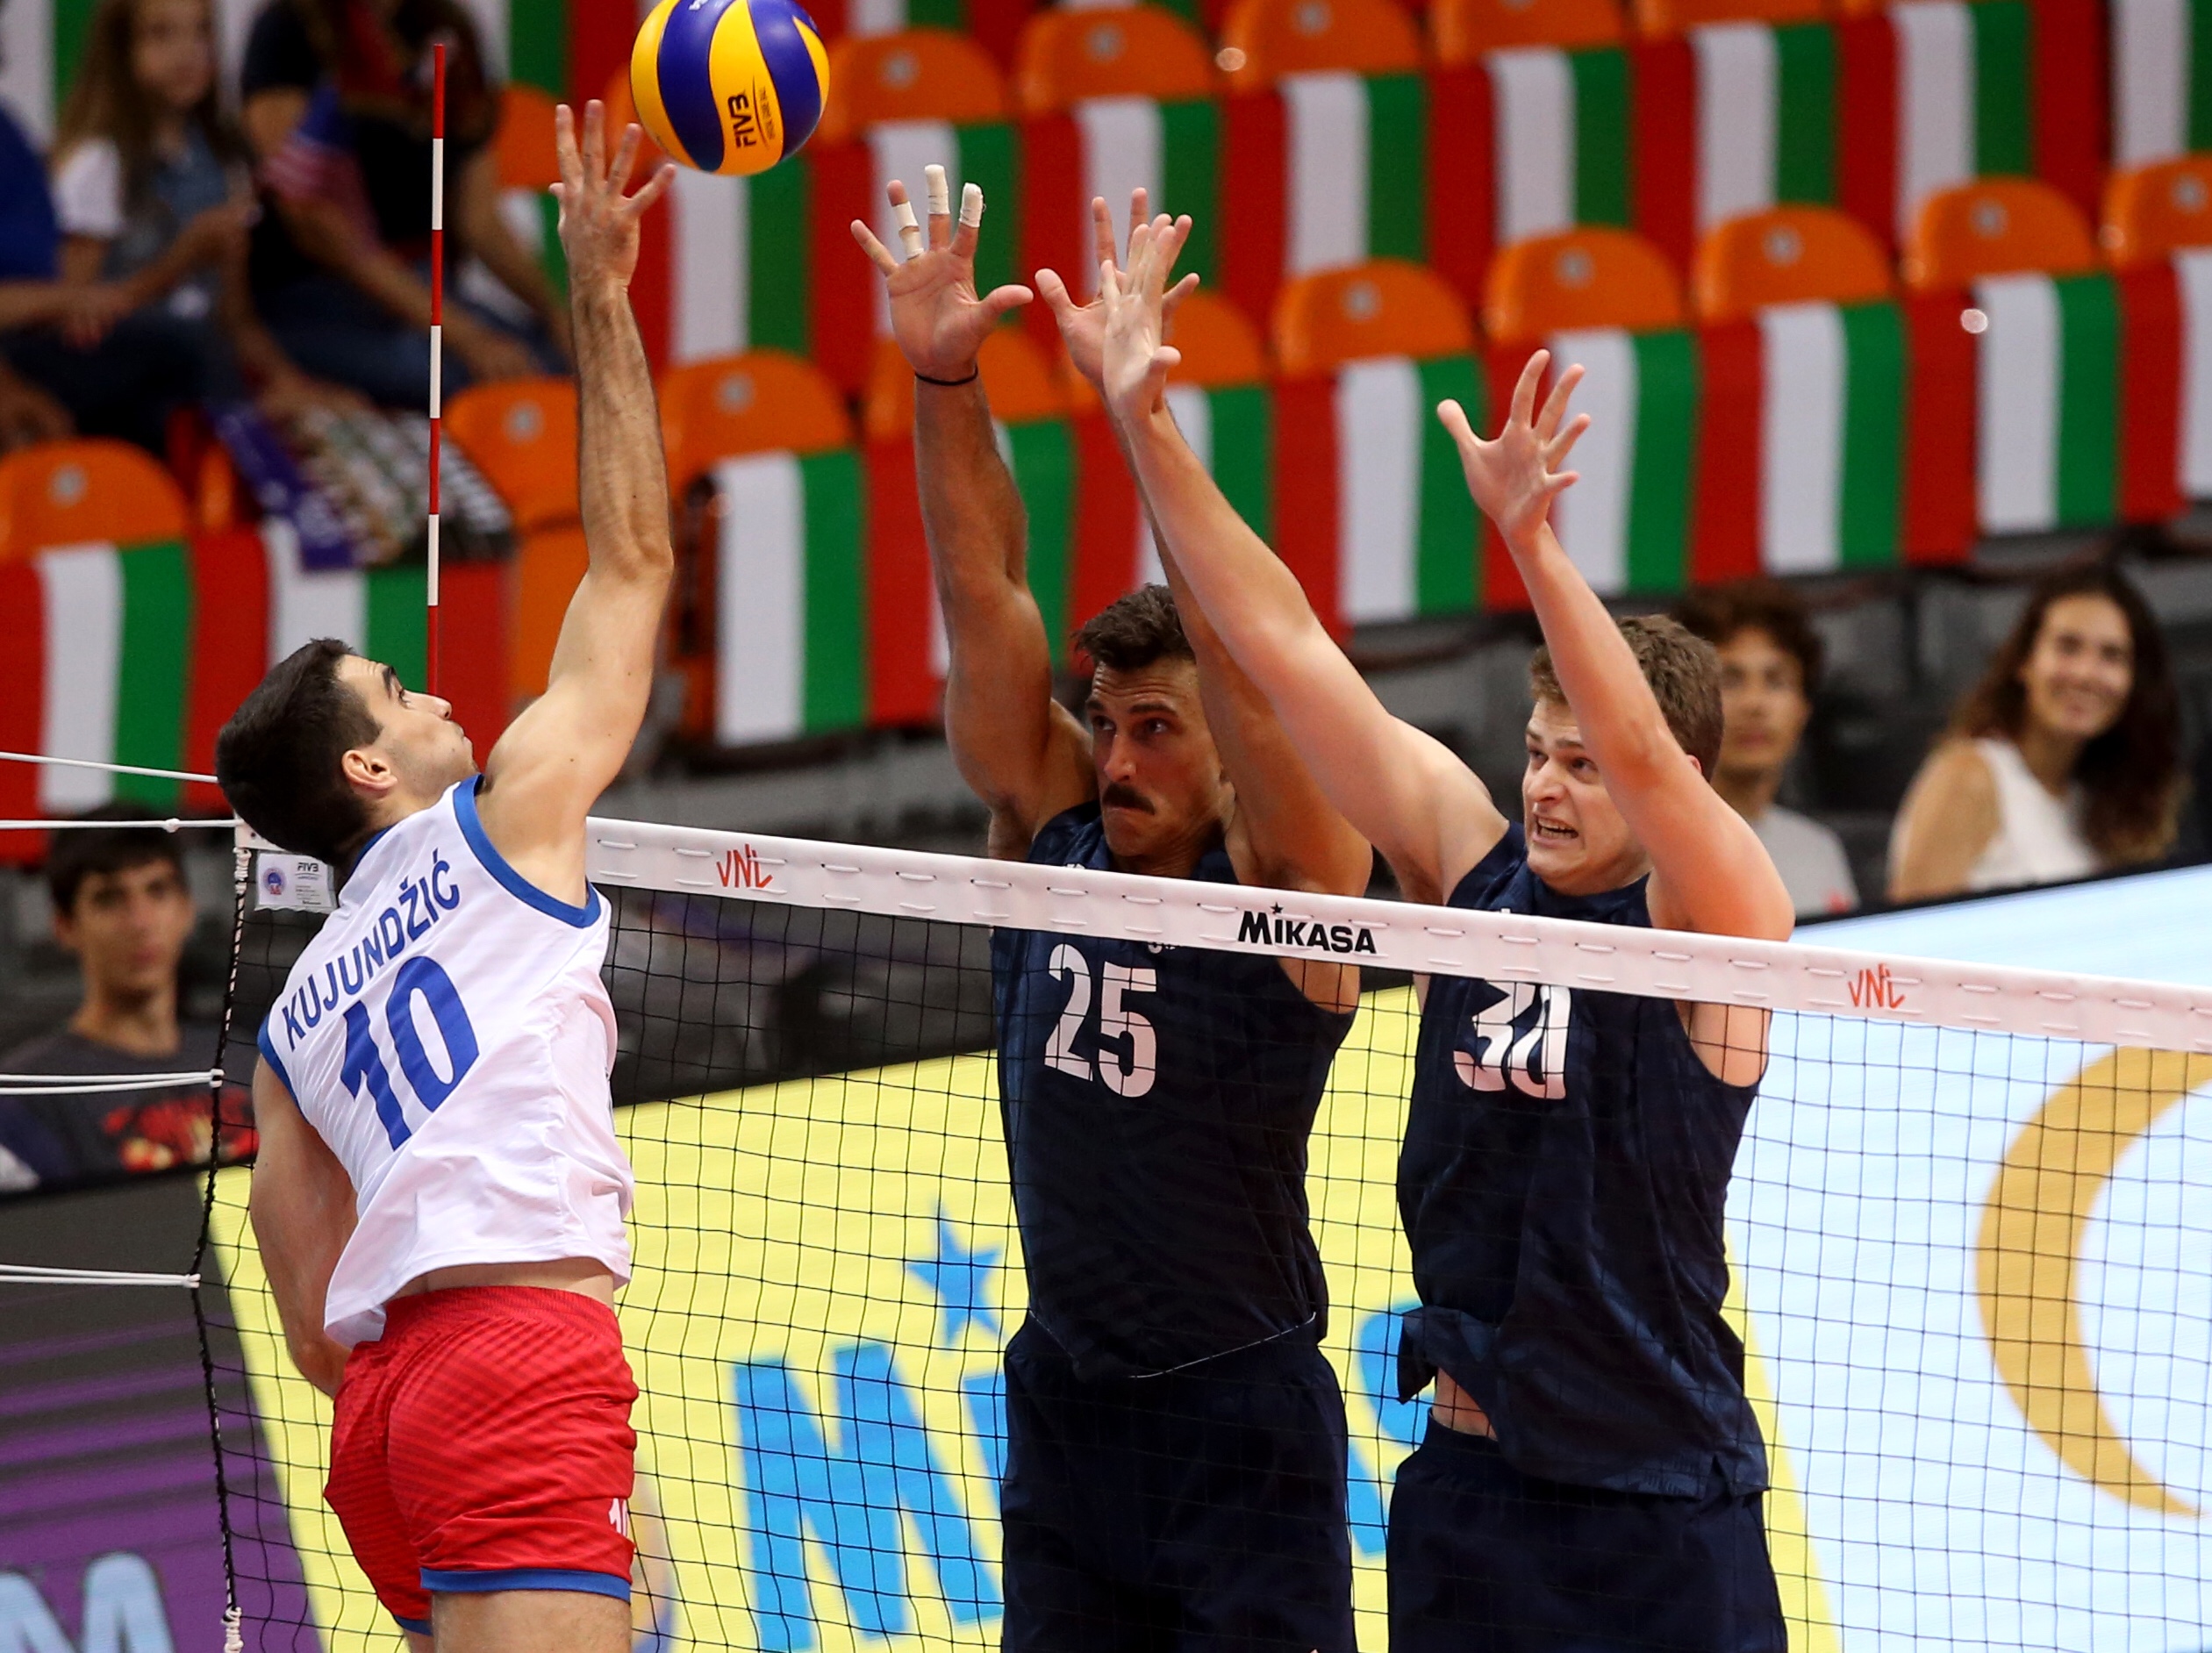 FIVB Volleyball Nations League match results from Saturday – Off the Block